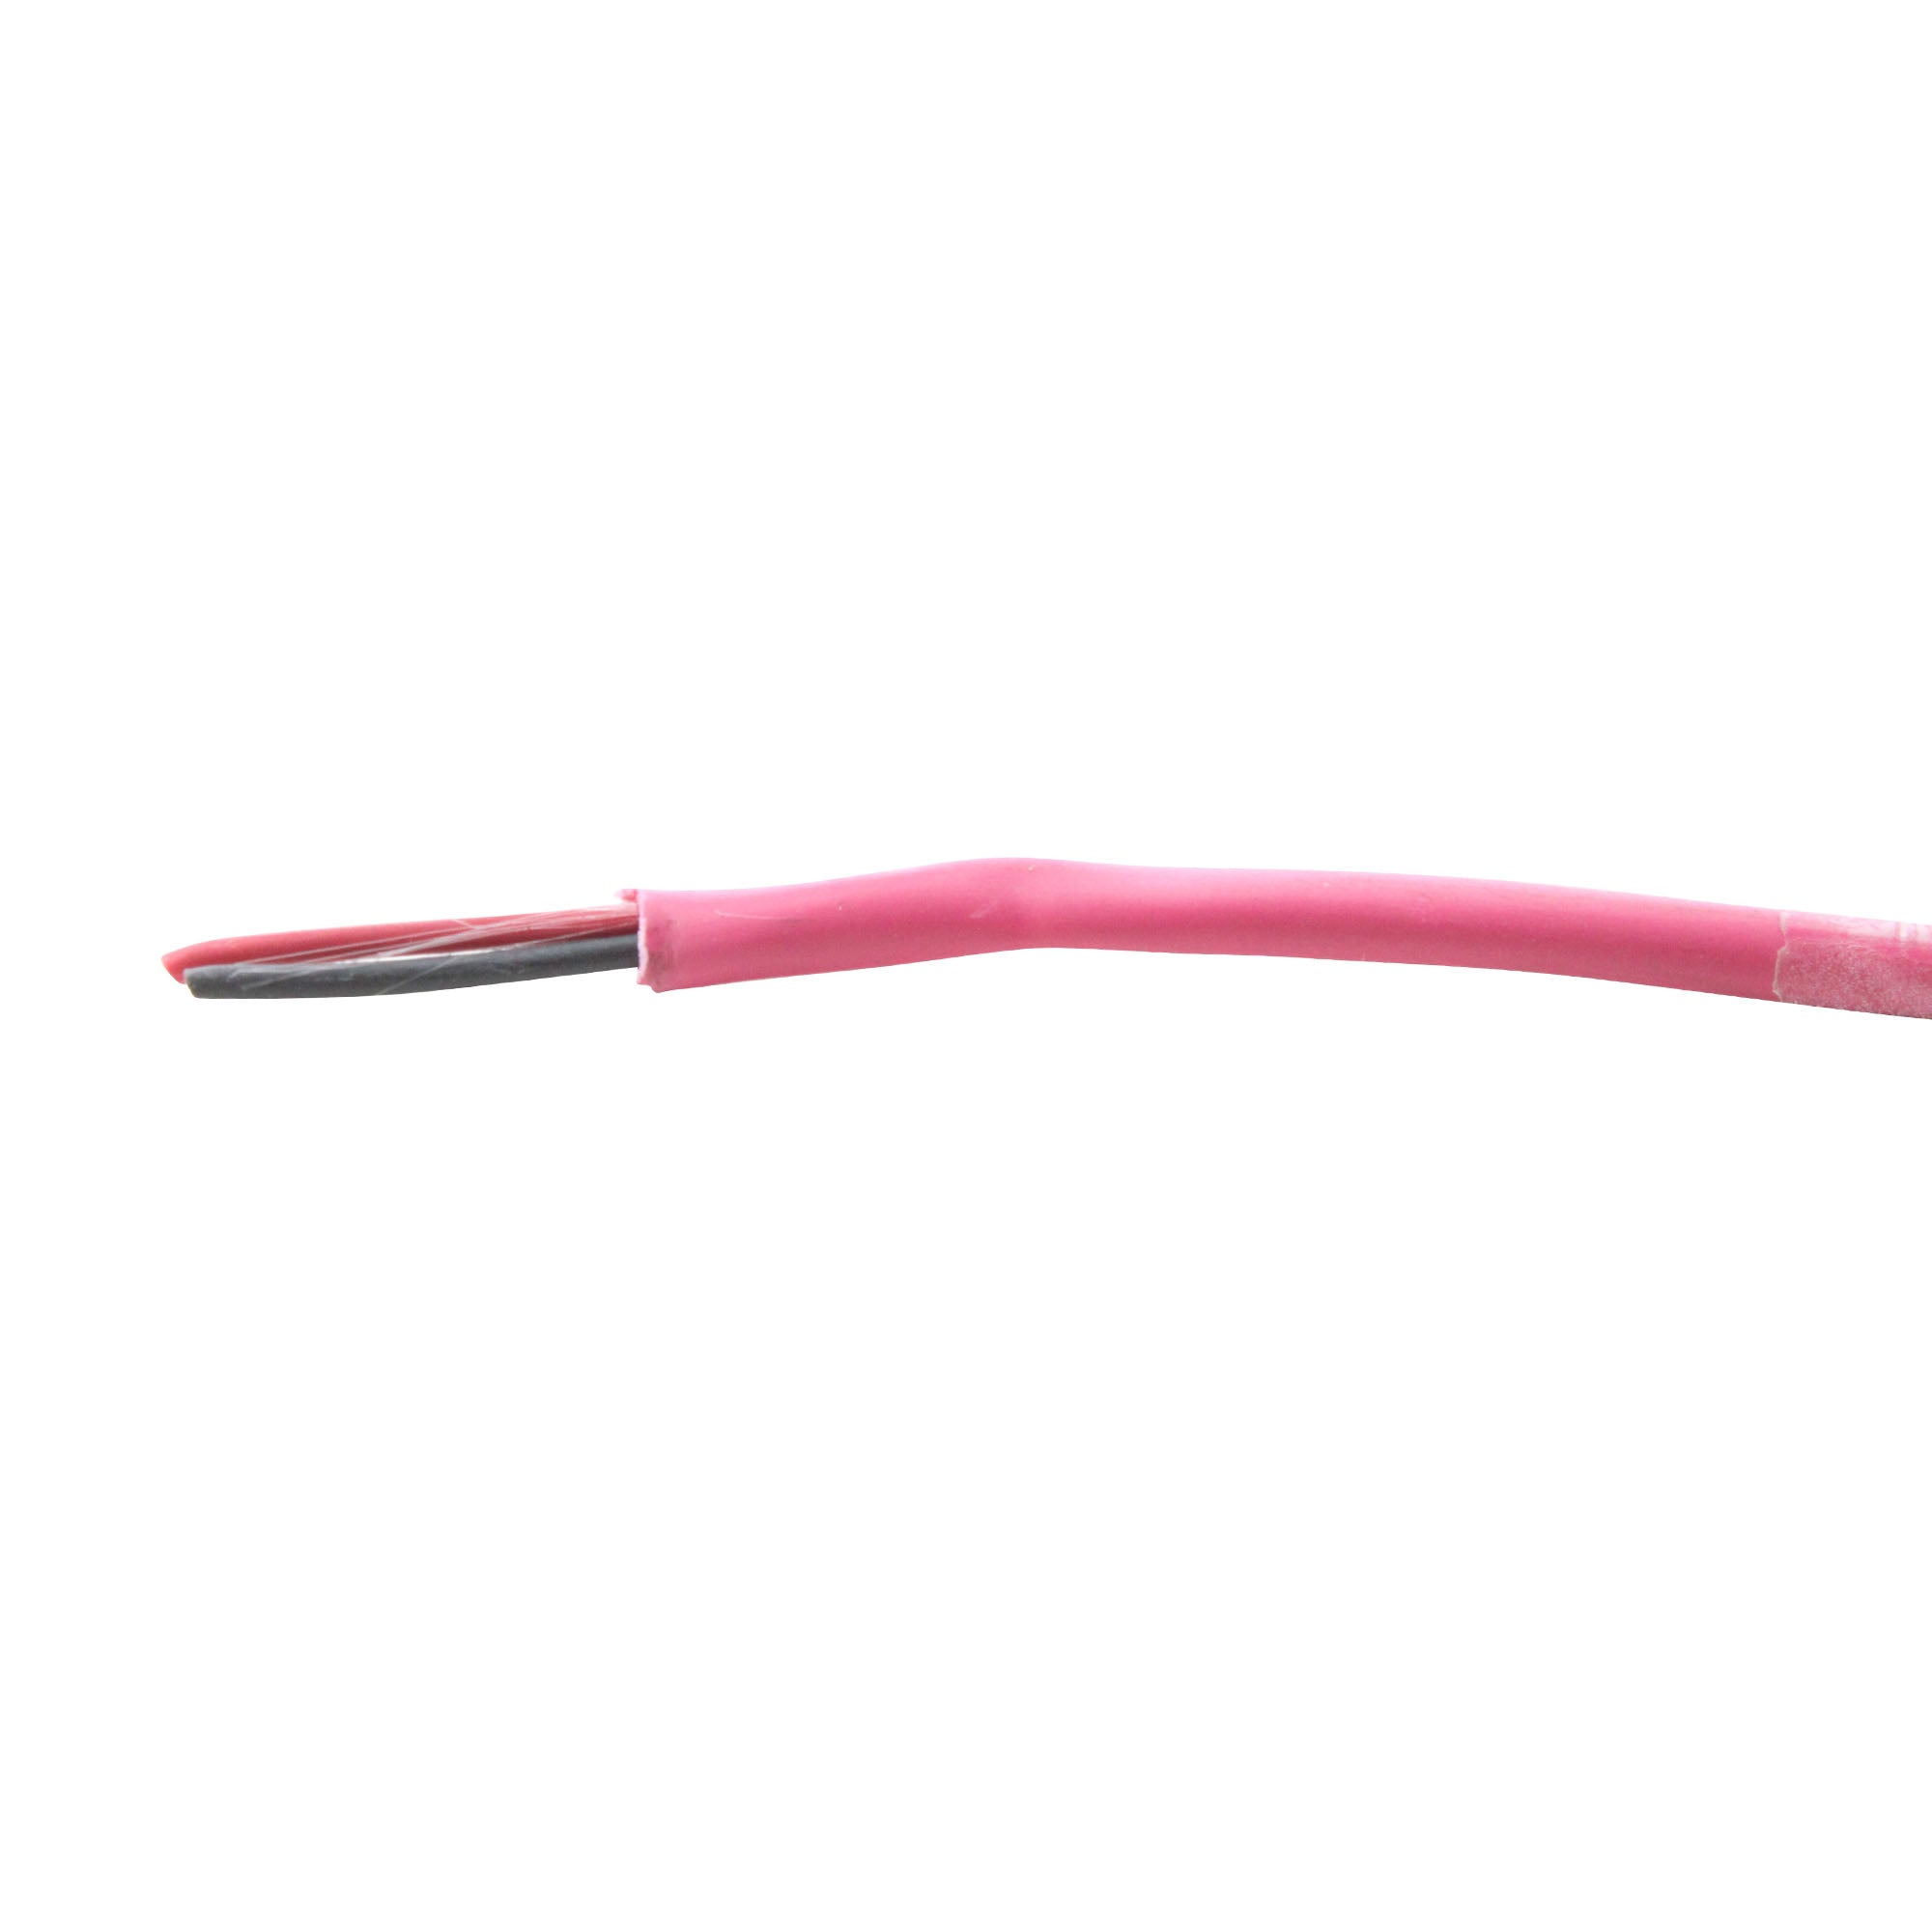 FASTER CABLE, FASTER CABLE P222C-PNK 22AWG 2C, 22/2 STR CMP PLENUM CONTROL CABLE, PINK, 1000'